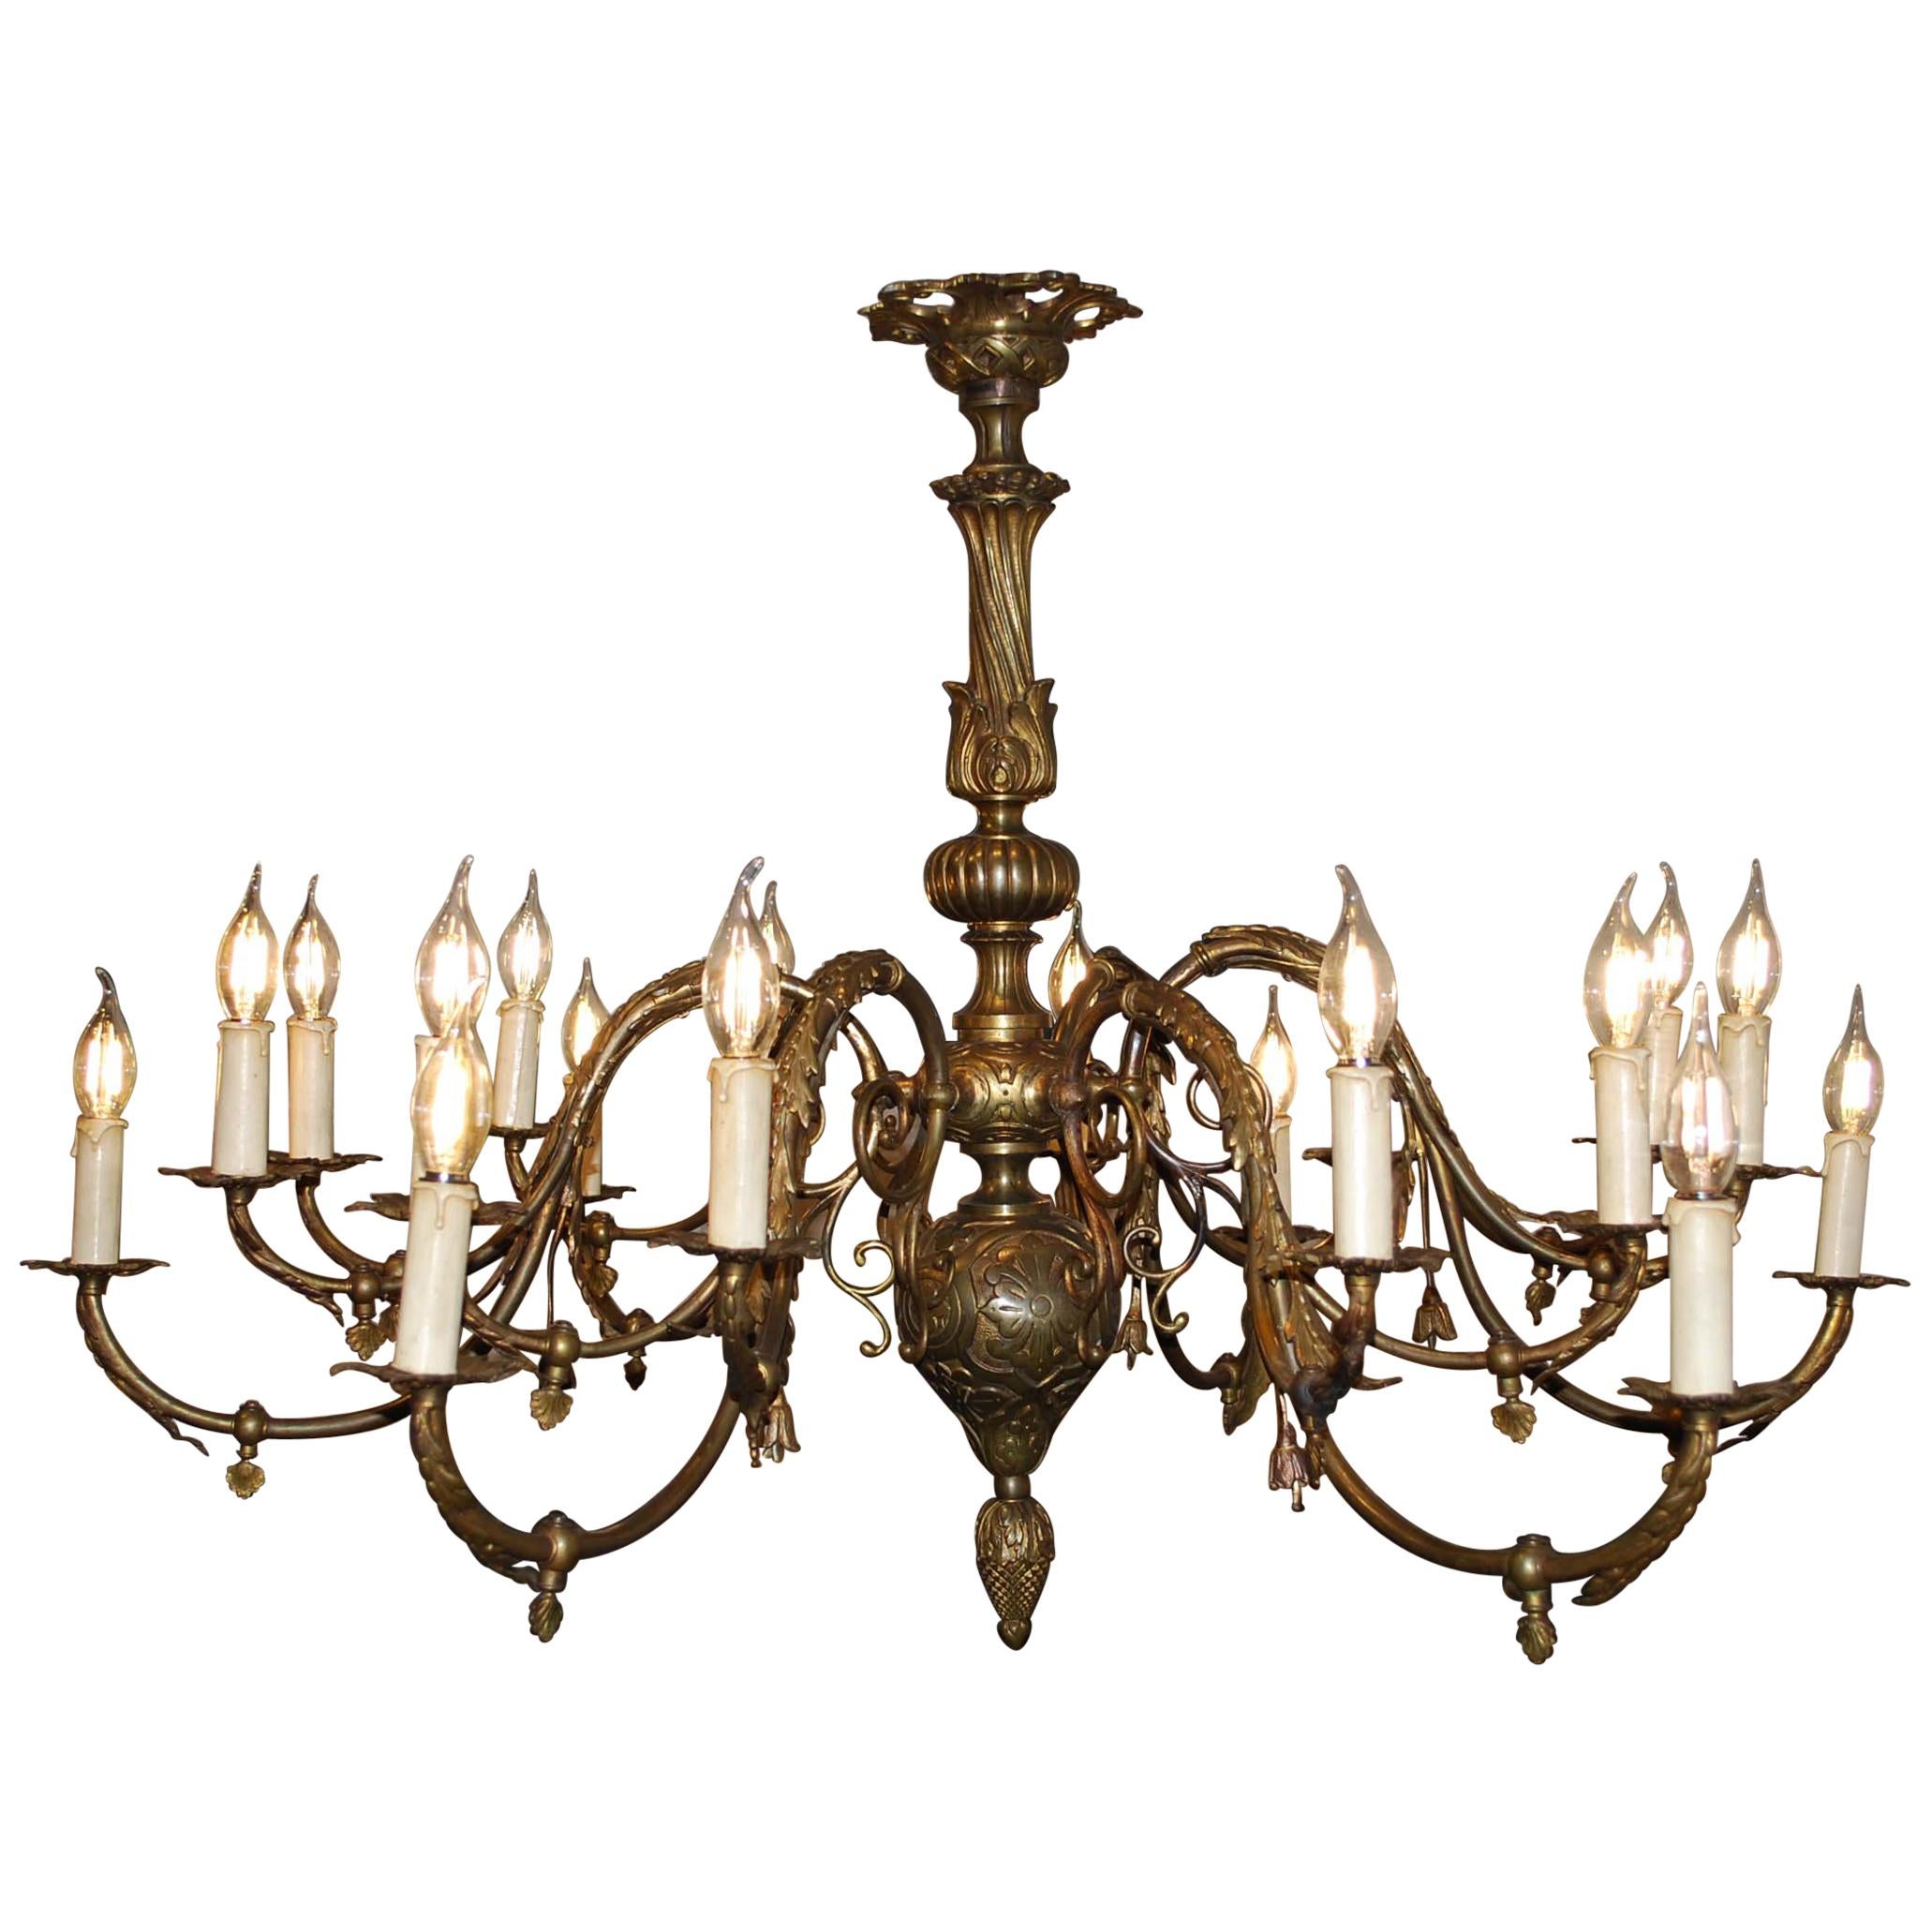 Large Antique French Renaissance Style Brass Electric Chandelier with 18 Lights